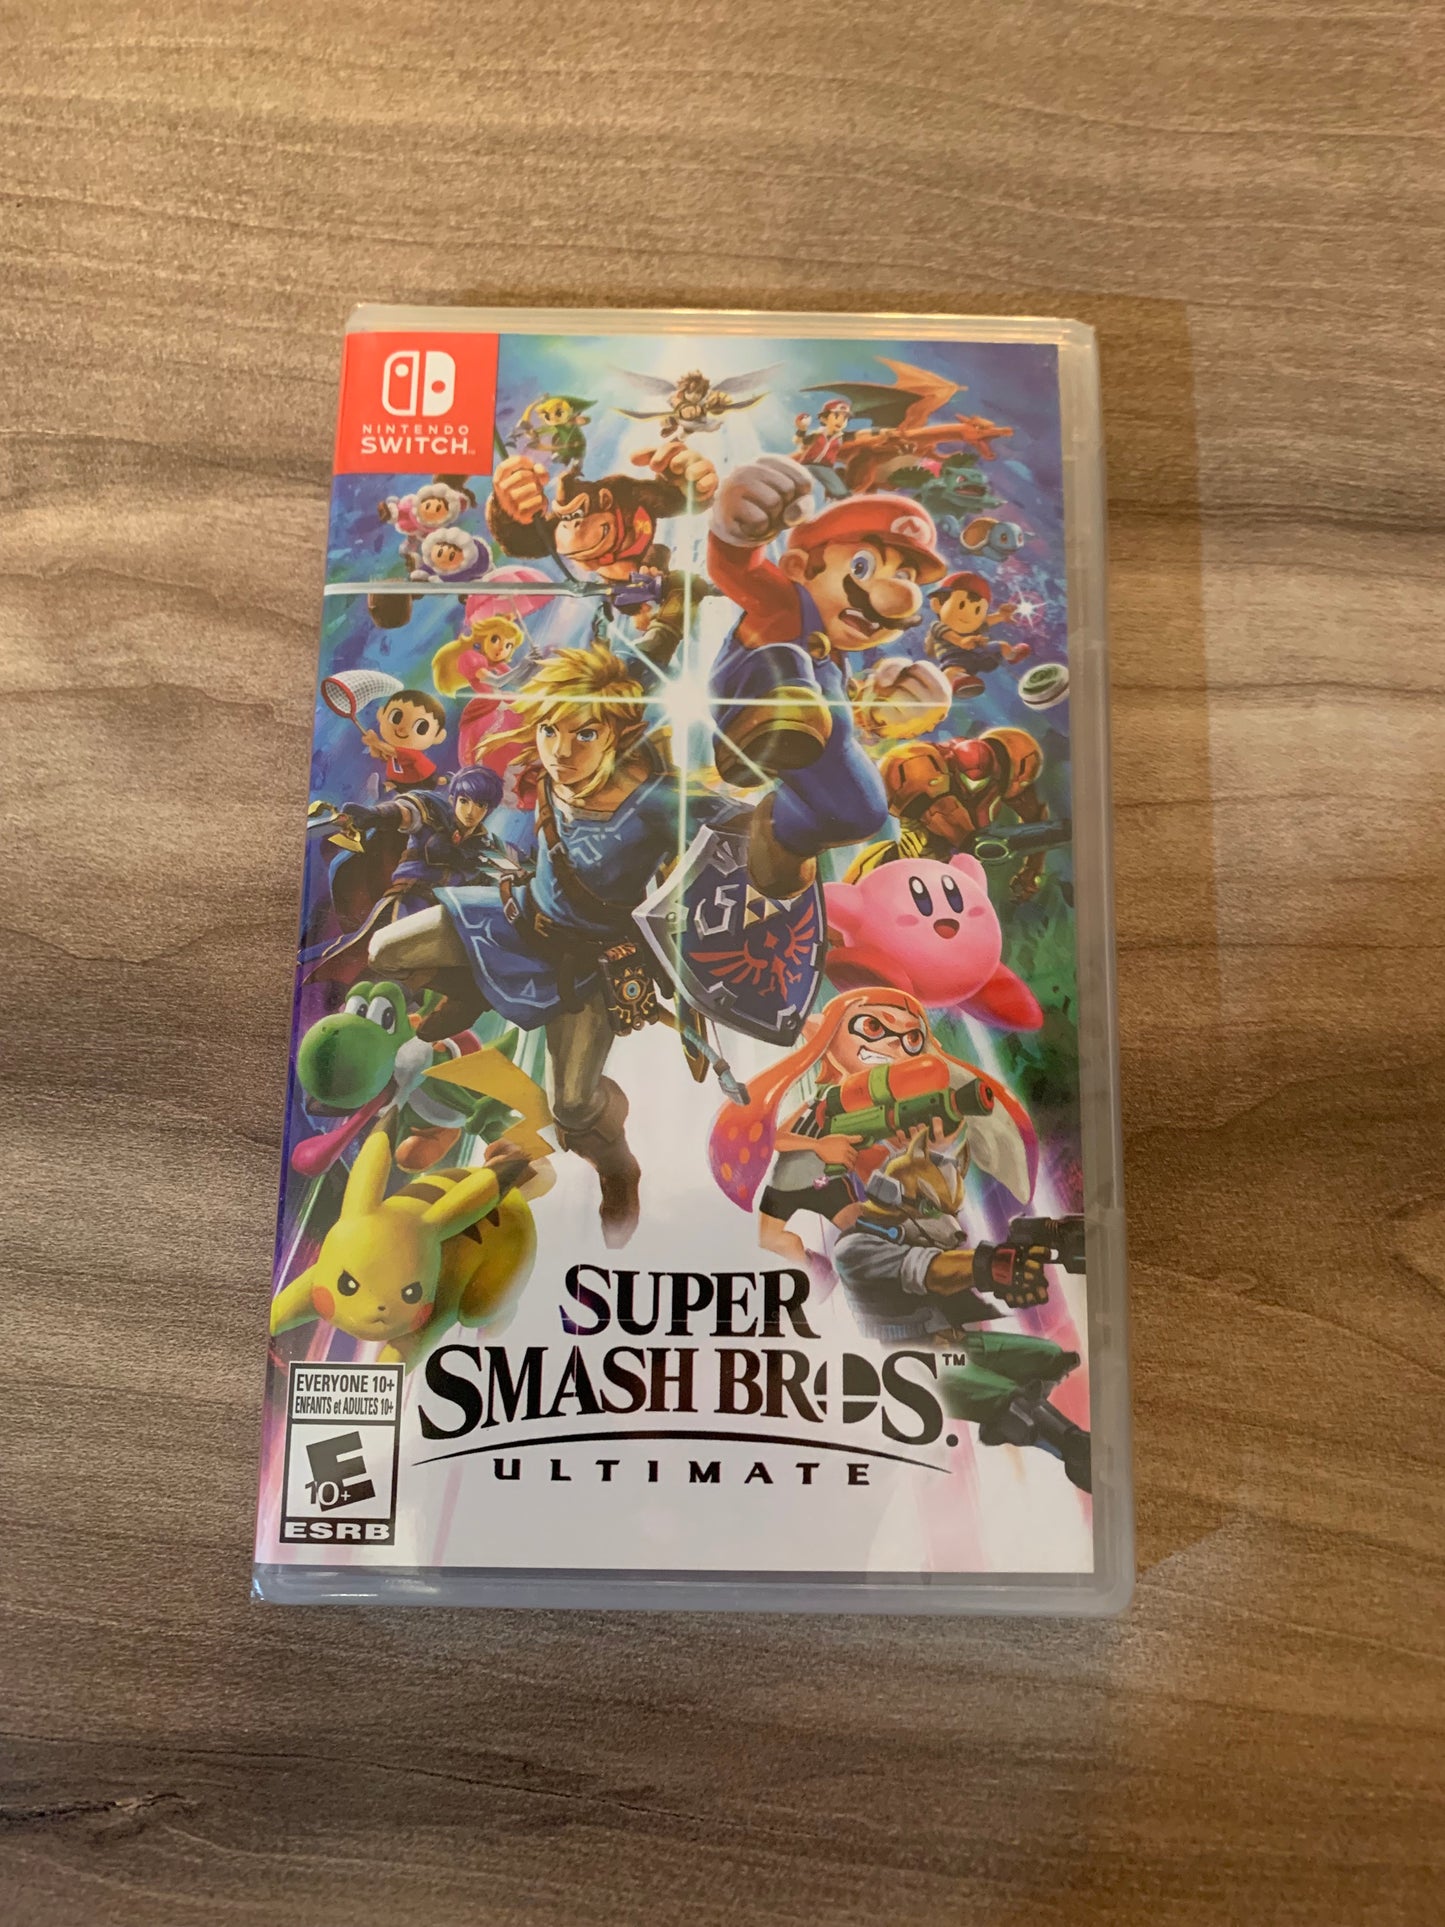 PiXEL-RETRO.COM : NINTENDO SWITCH NEW SEALED IN BOX COMPLETE MANUAL GAME NTSC NEW SEALED SUPER SMASH BROS. ULTIMATE